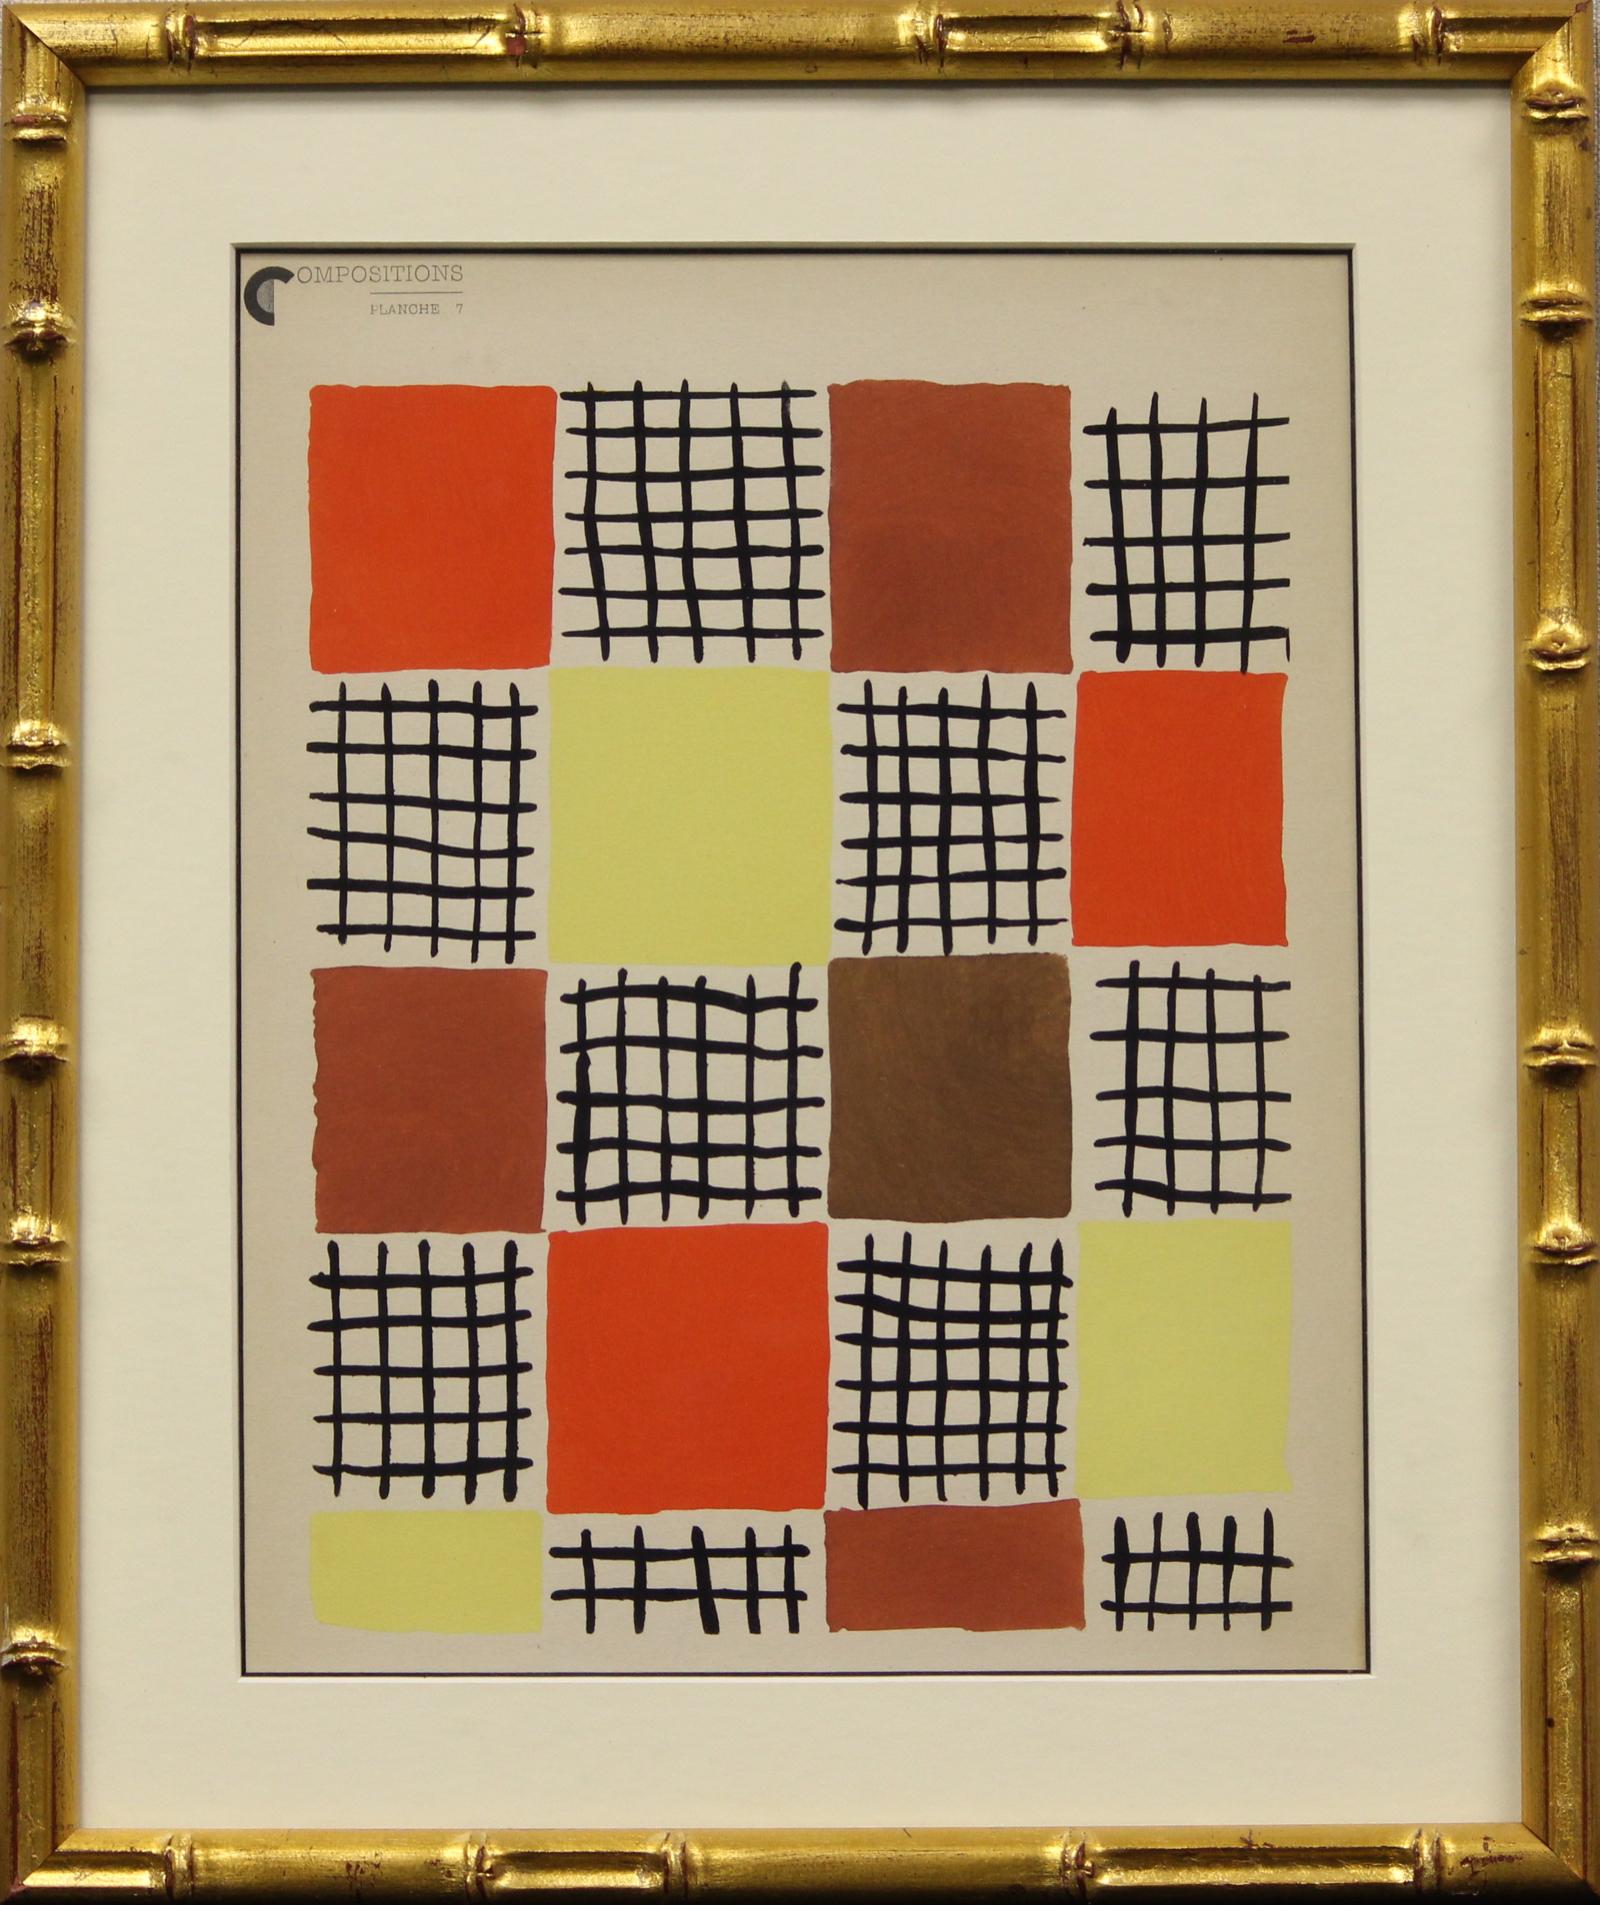 Sonia Delaunay (1885-1979)

Planche 7 pochoir from the portfolio "Compositions, couleurs, idees" 1930

Image Sz: 12"H x 10"W

Frame Sz: 15"H x 13"W

w/ gilt bamboo frame